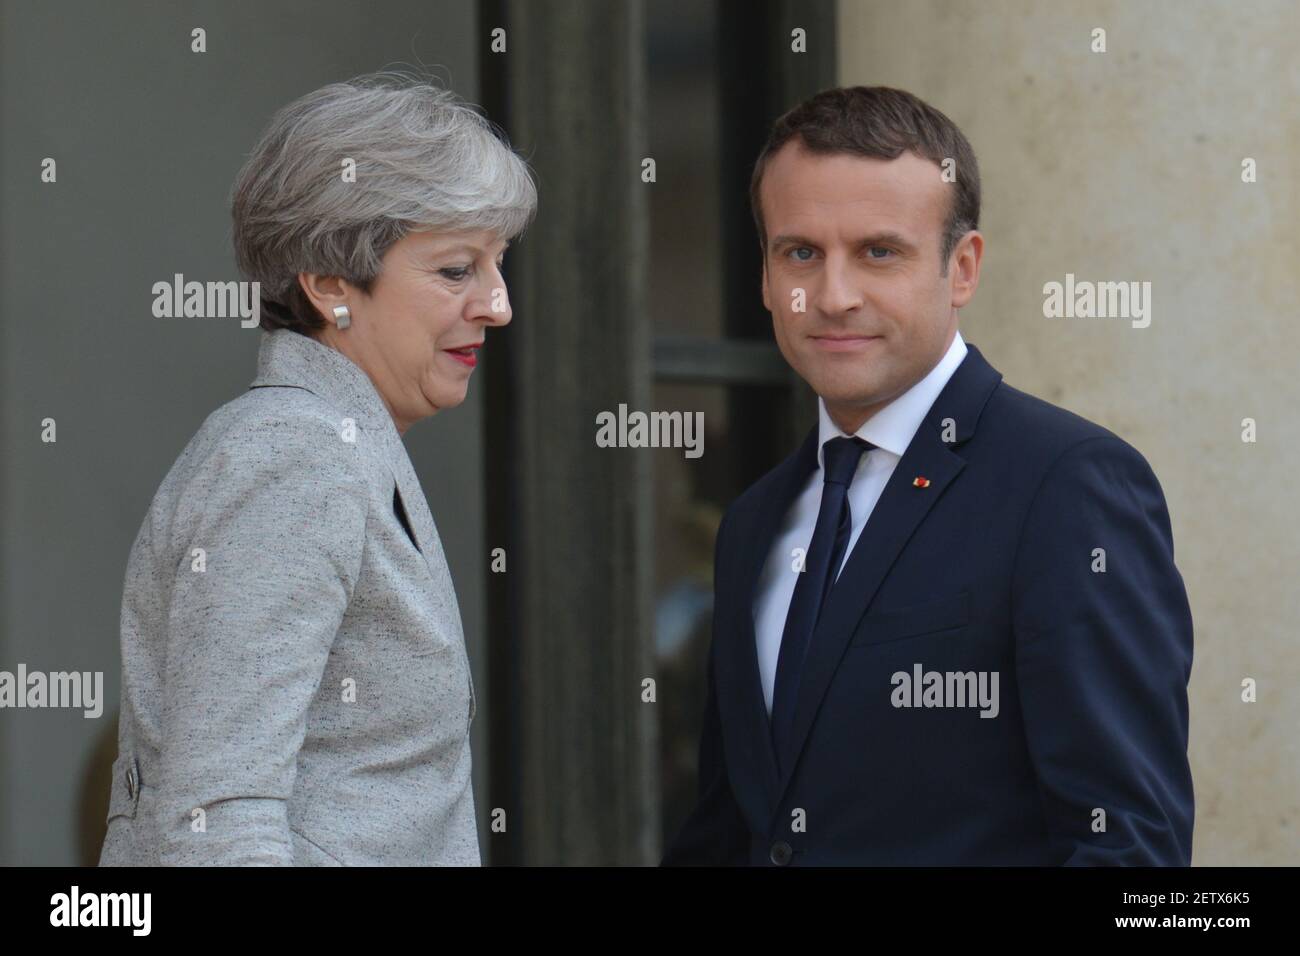 French President Emmanuel Macron welcomes British PM, Theresa May, as she arrives at The Élysée Palace . On Tuesday, June 13, 2017, in Paris, France. Photo by Artur Widak *** Please Use Credit from Credit Field ***  Stock Photo